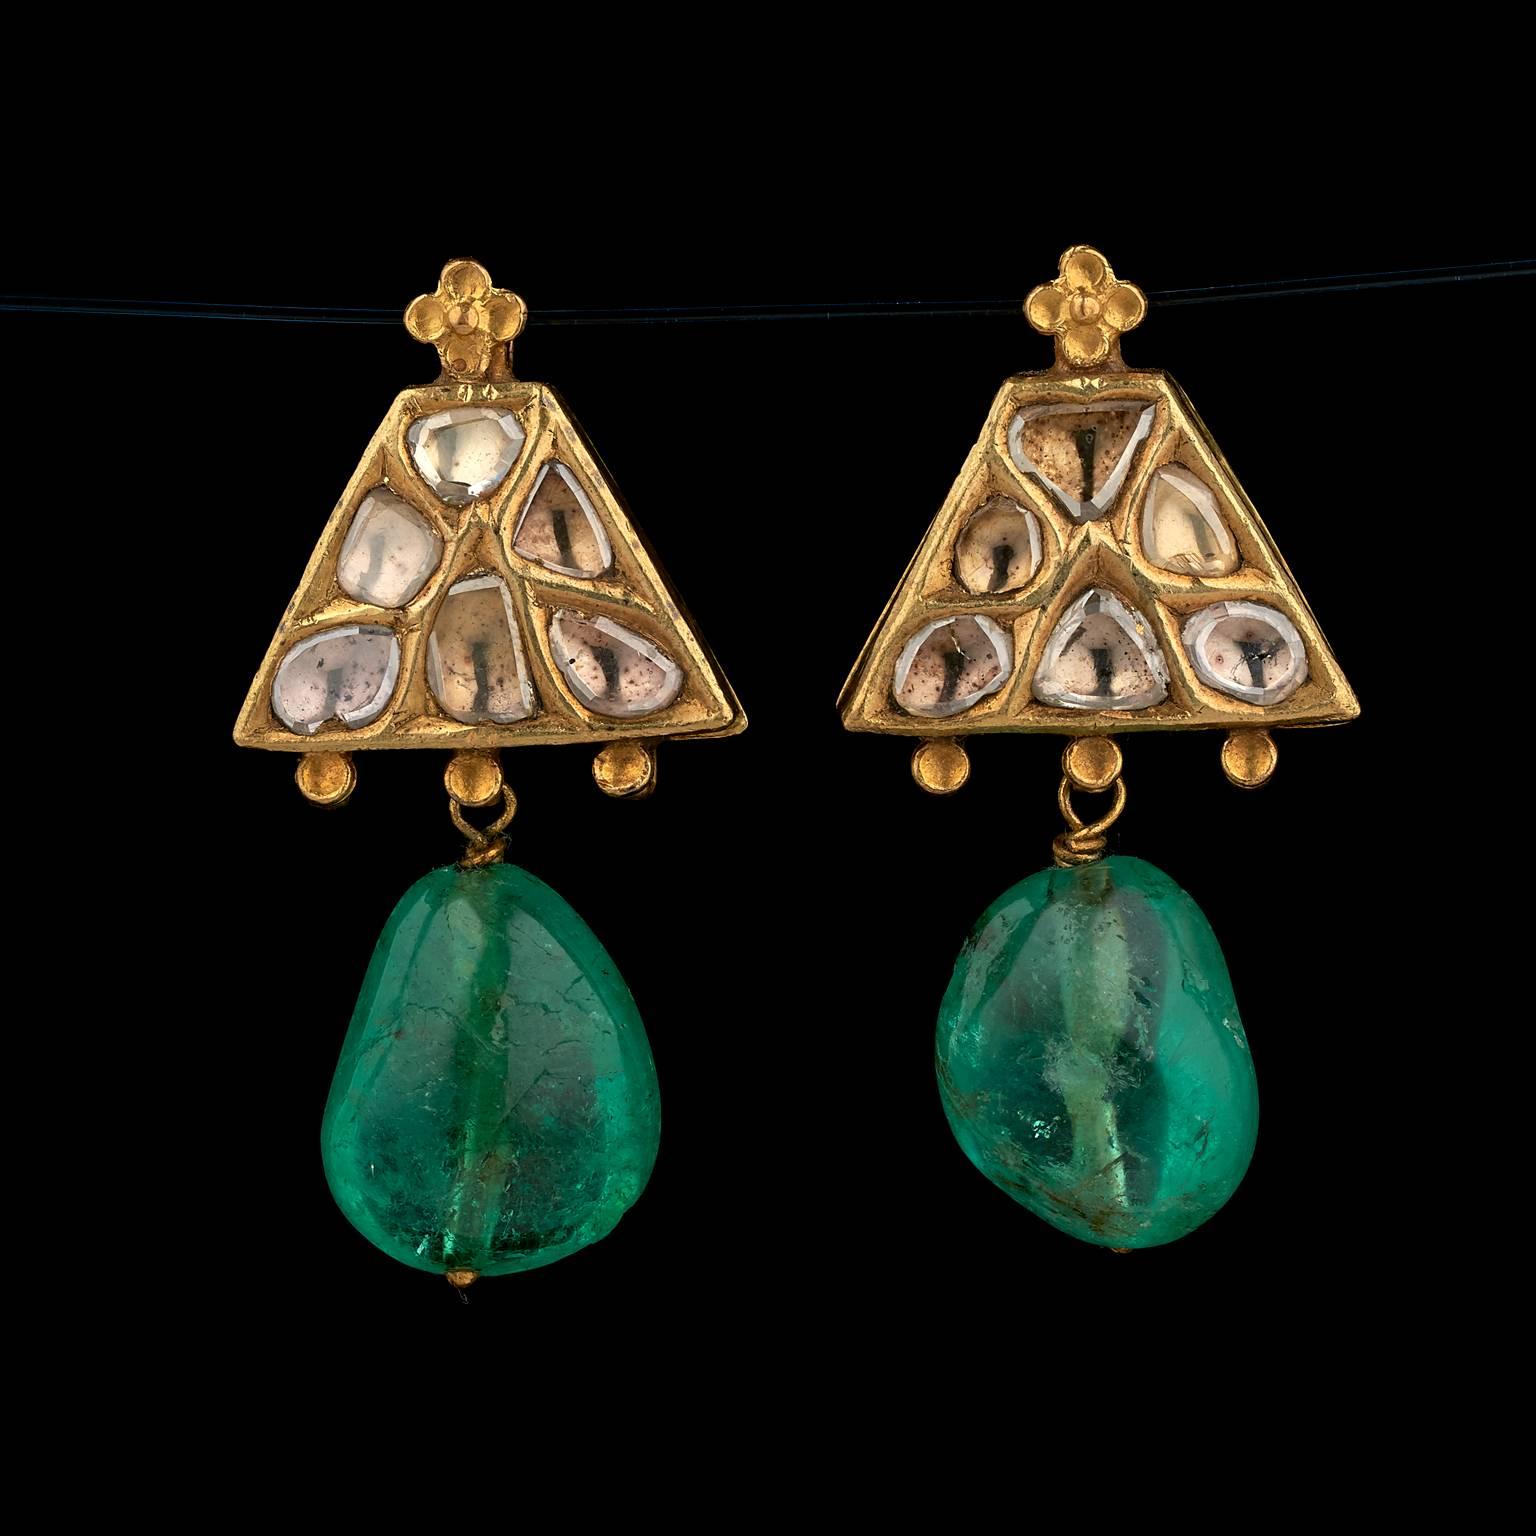 A Pair of Earrings
Mughal or Deccan, India
18th Century

Fabricated from gold, the front worked in kundan (traditional pure gold setting) technique, set with table-cut foiled diamonds. The back is textured, chased and engraved in relief with